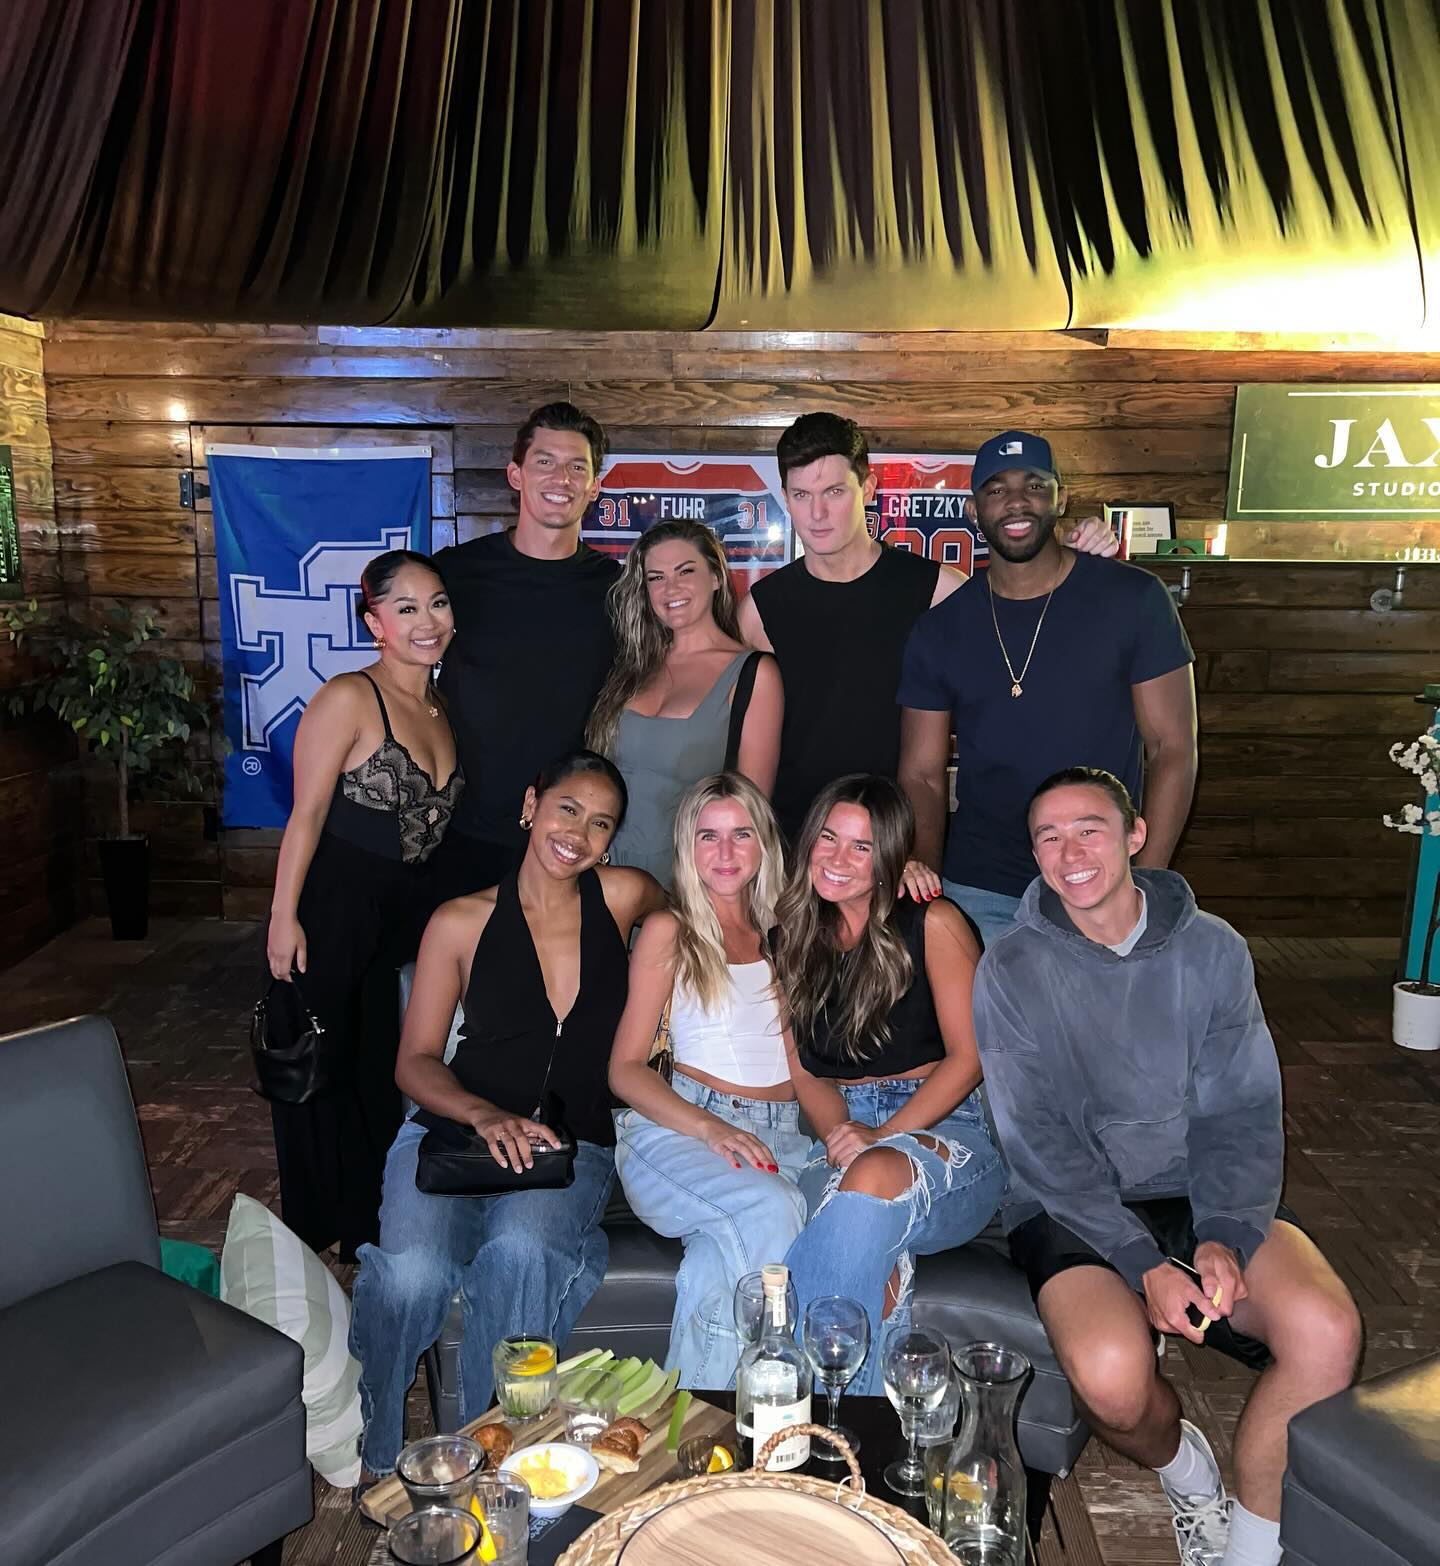 The Valley star and the Bachelorette star first met in July at a watch party and have continued to attend them together